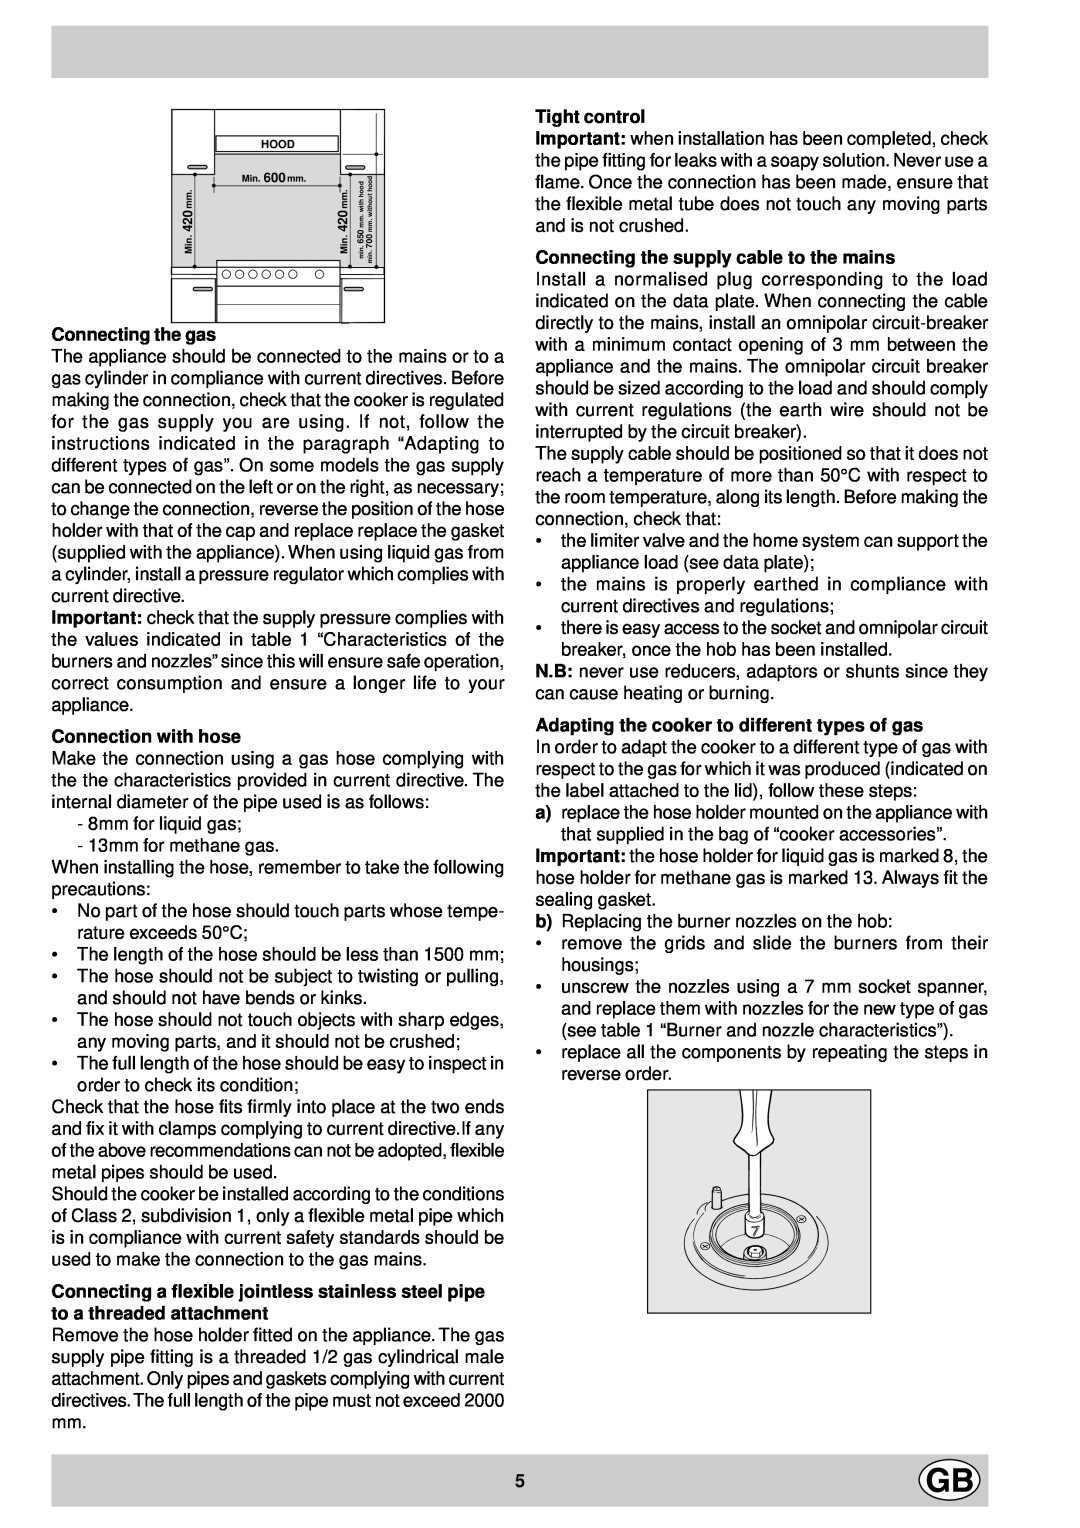 Indesit K1G21/R manual Connecting the gas, Connection with hose, Tight control, Connecting the supply cable to the mains 